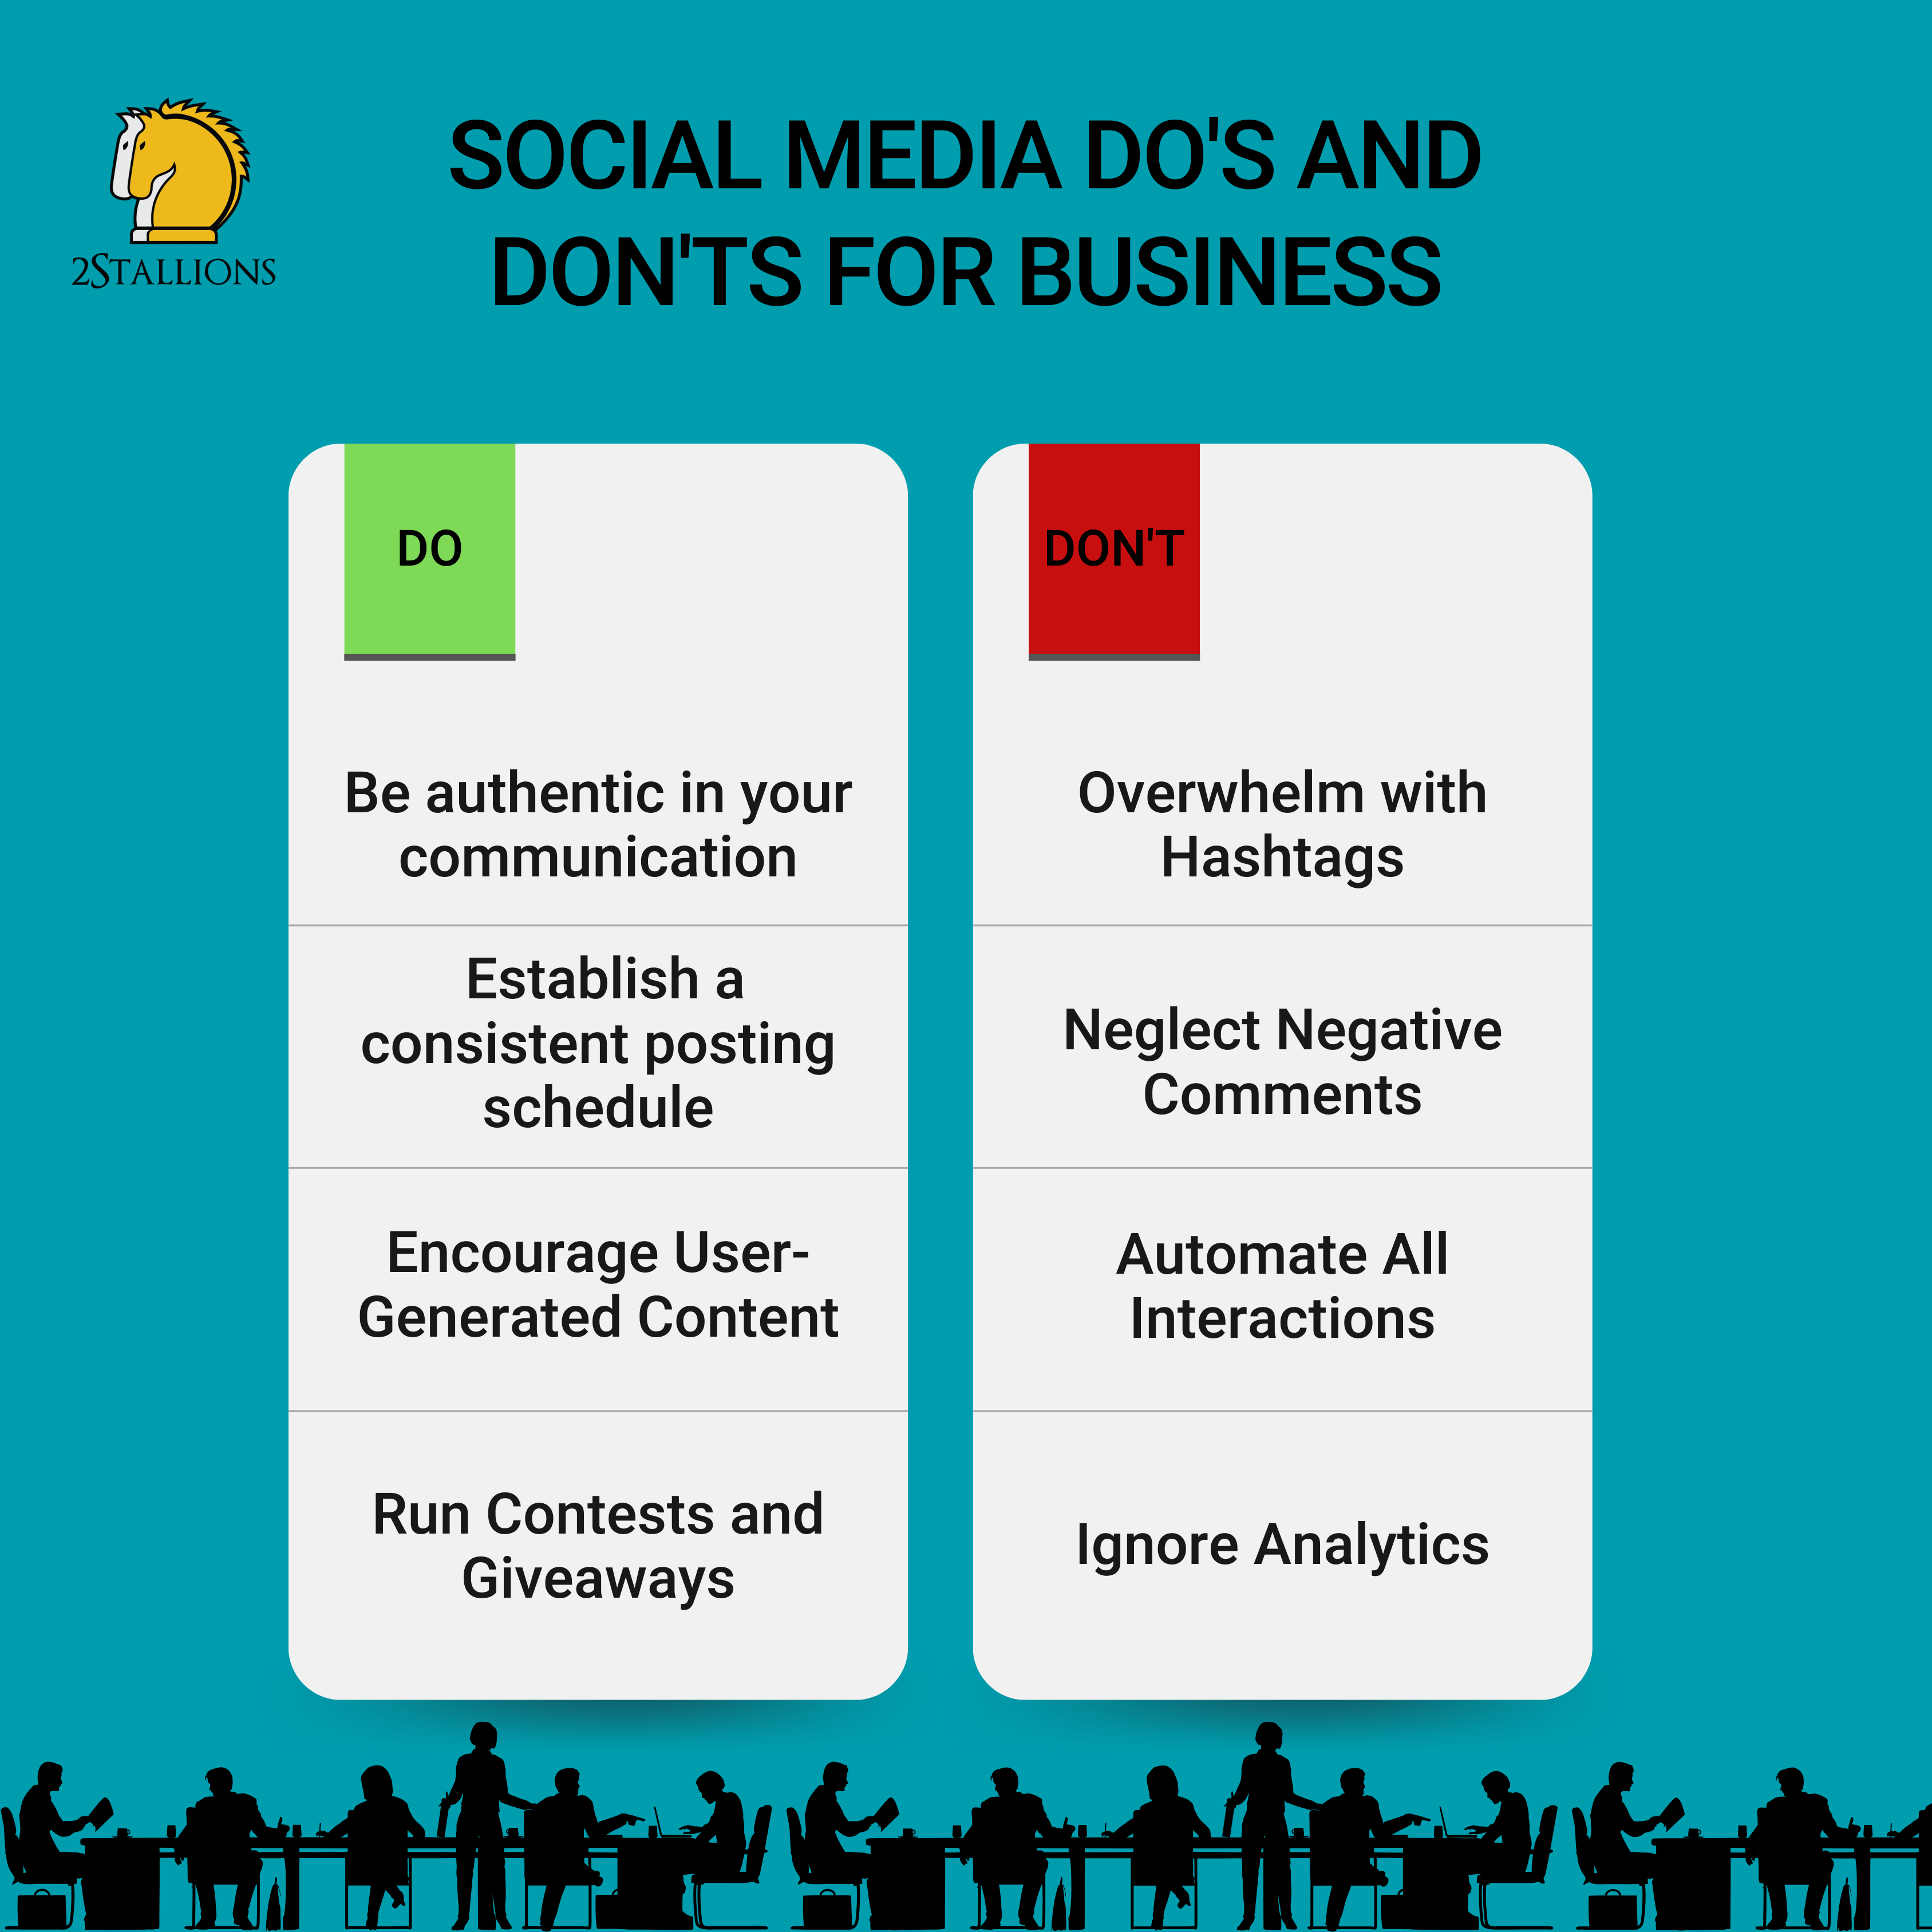 Social Media Do's and Don'ts for Business | 2Stallions